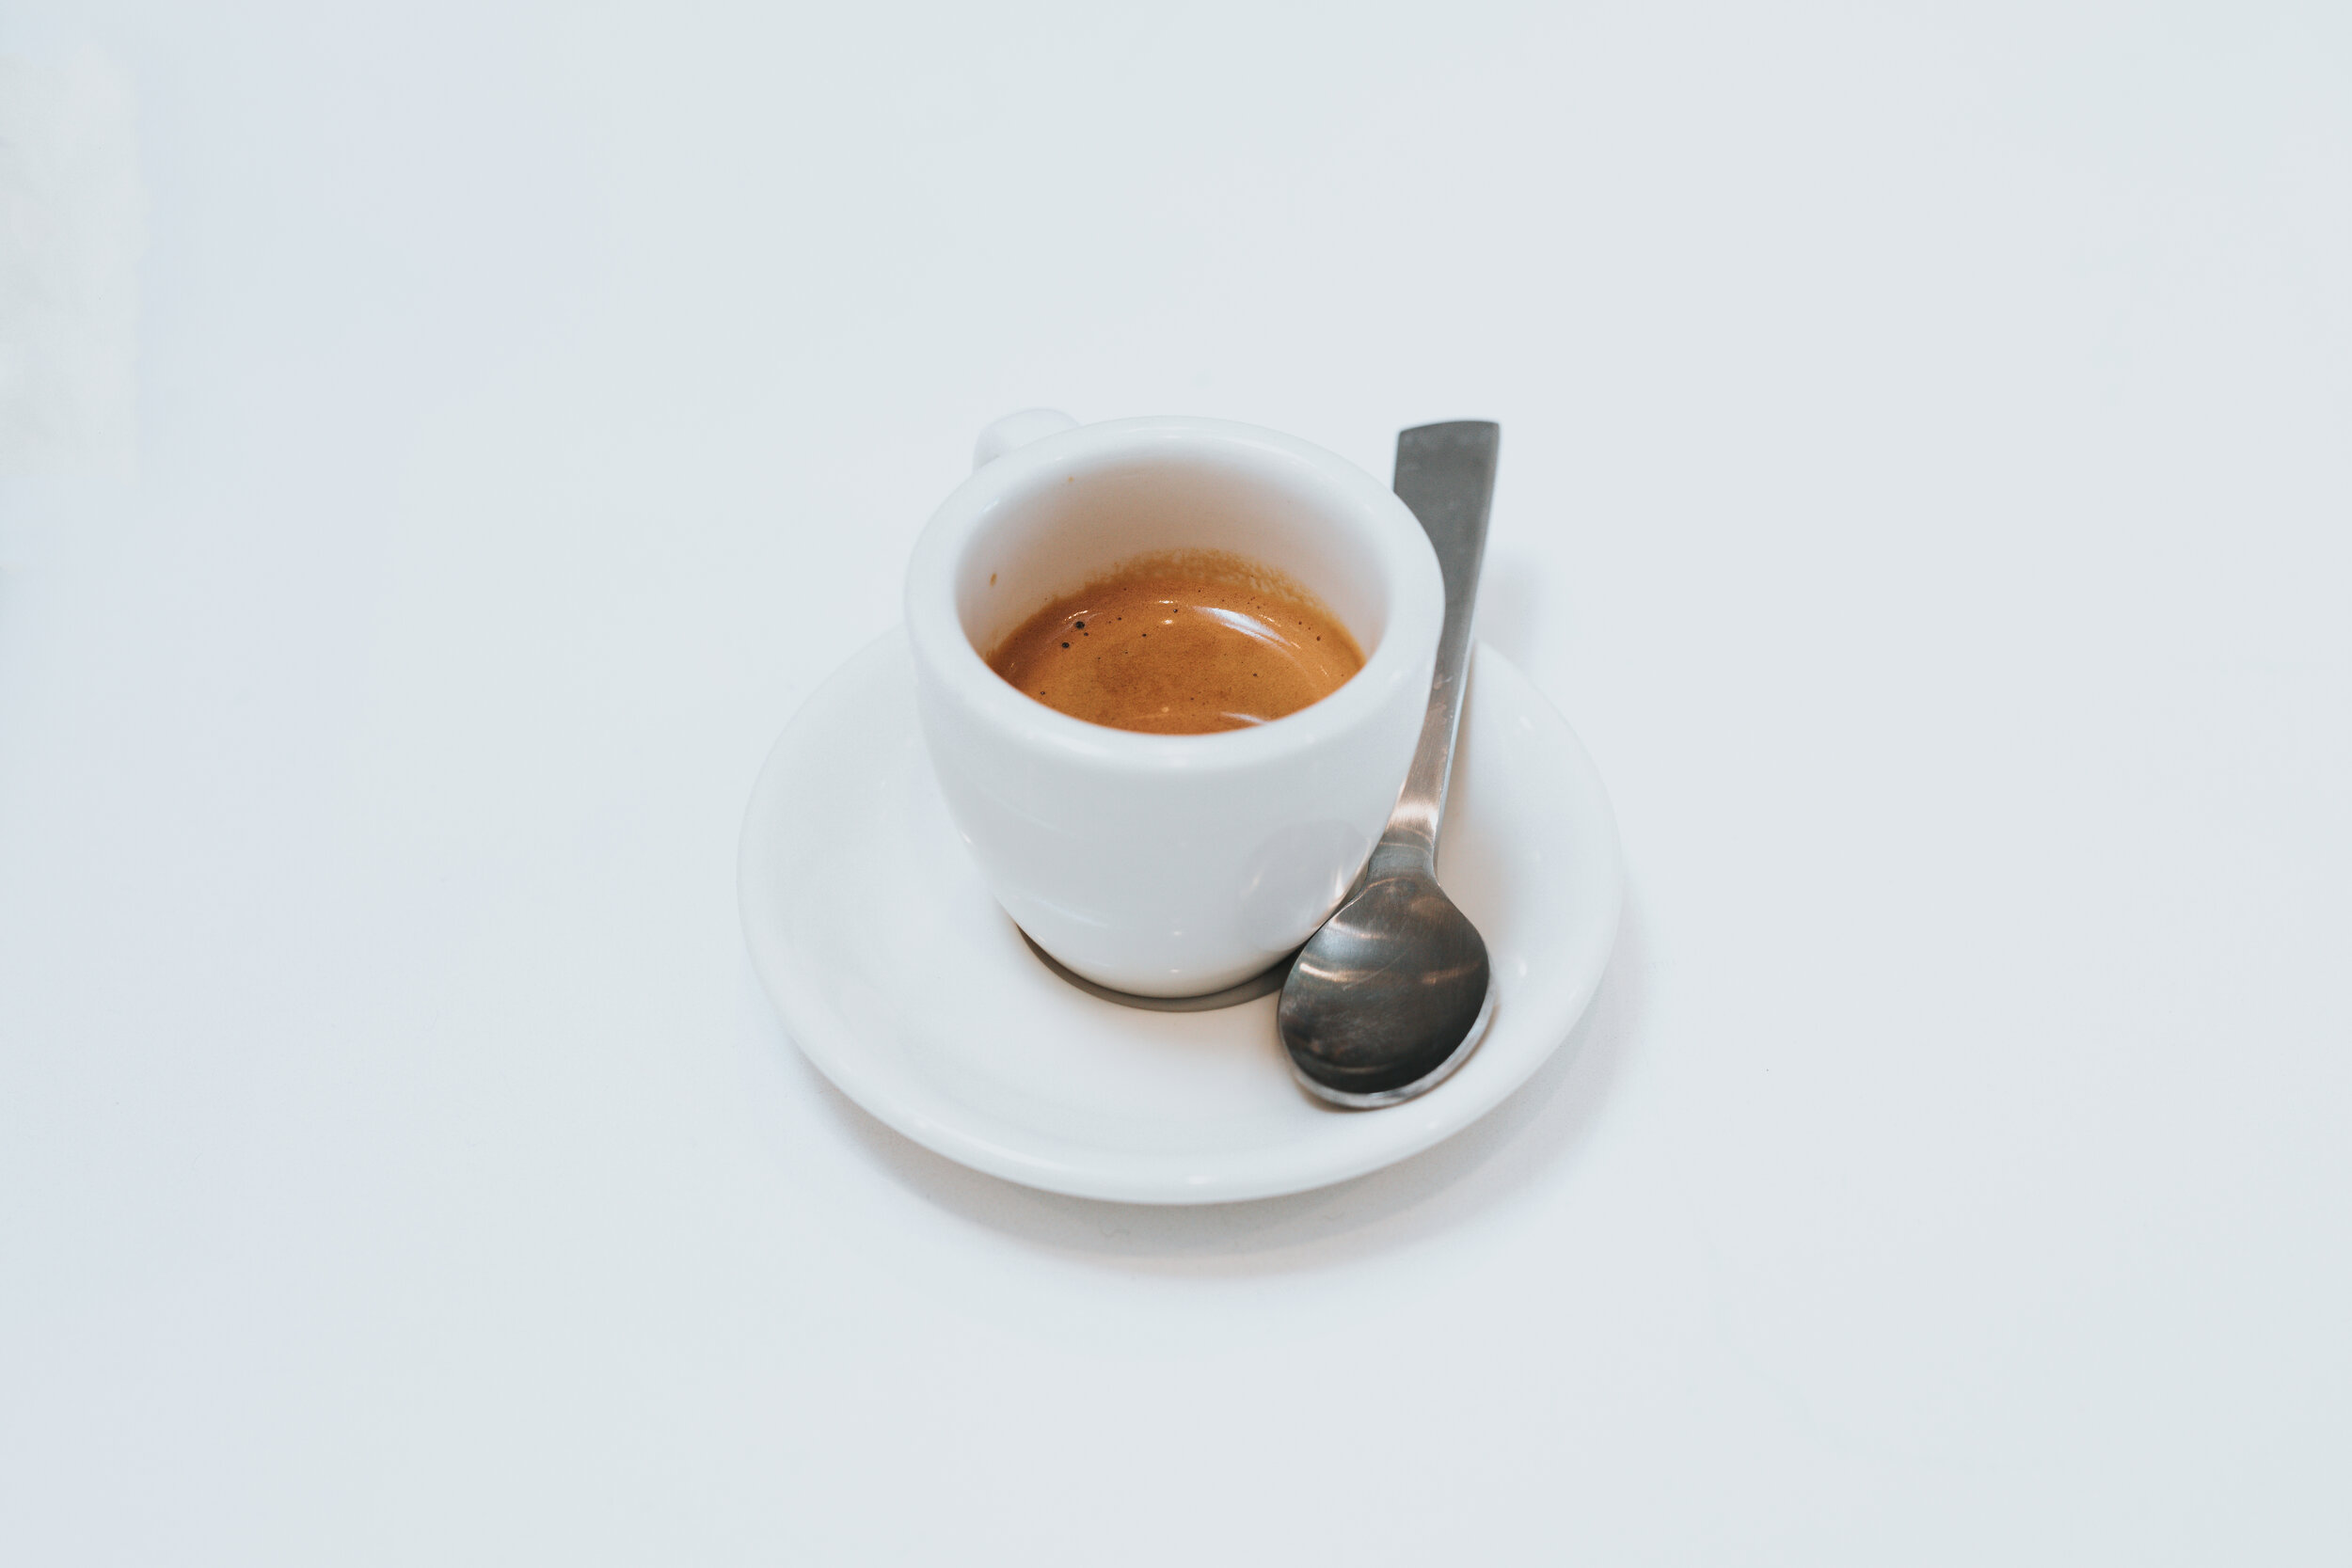 https://images.squarespace-cdn.com/content/v1/5e5586ca1046aa2b89894894/1585401270965-RJ4YRX3ANYLOR70B5DTQ/Picture+of+Espresso+Shot+in+Cup+with+Spoon